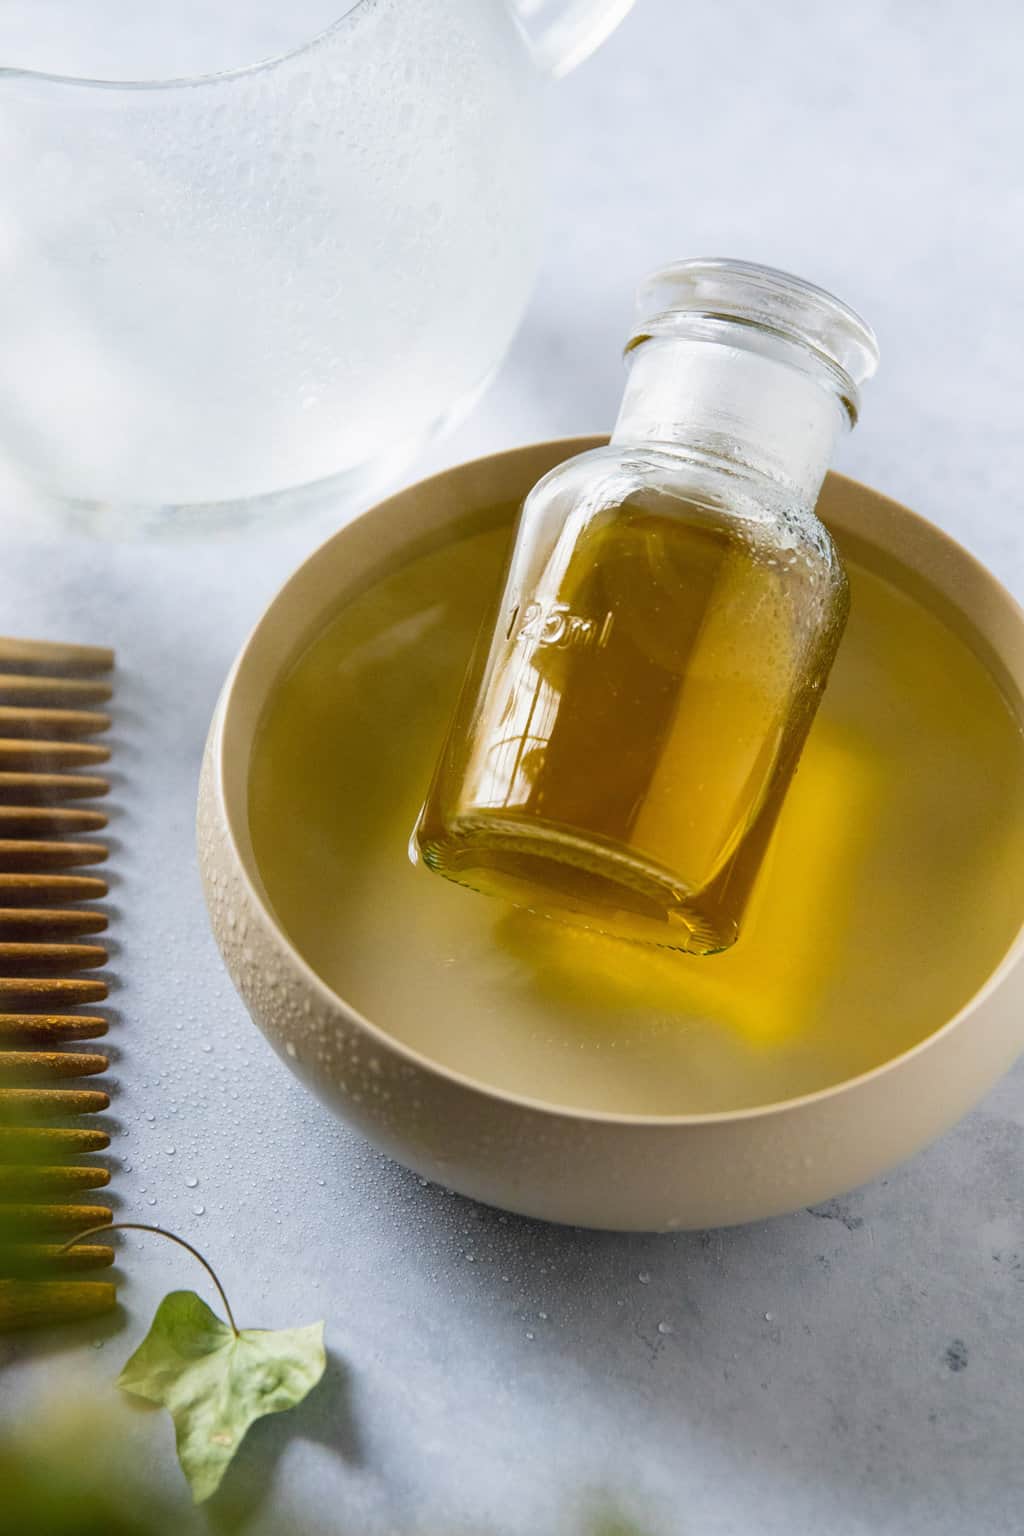 How to warm oil for a hot oil treatment